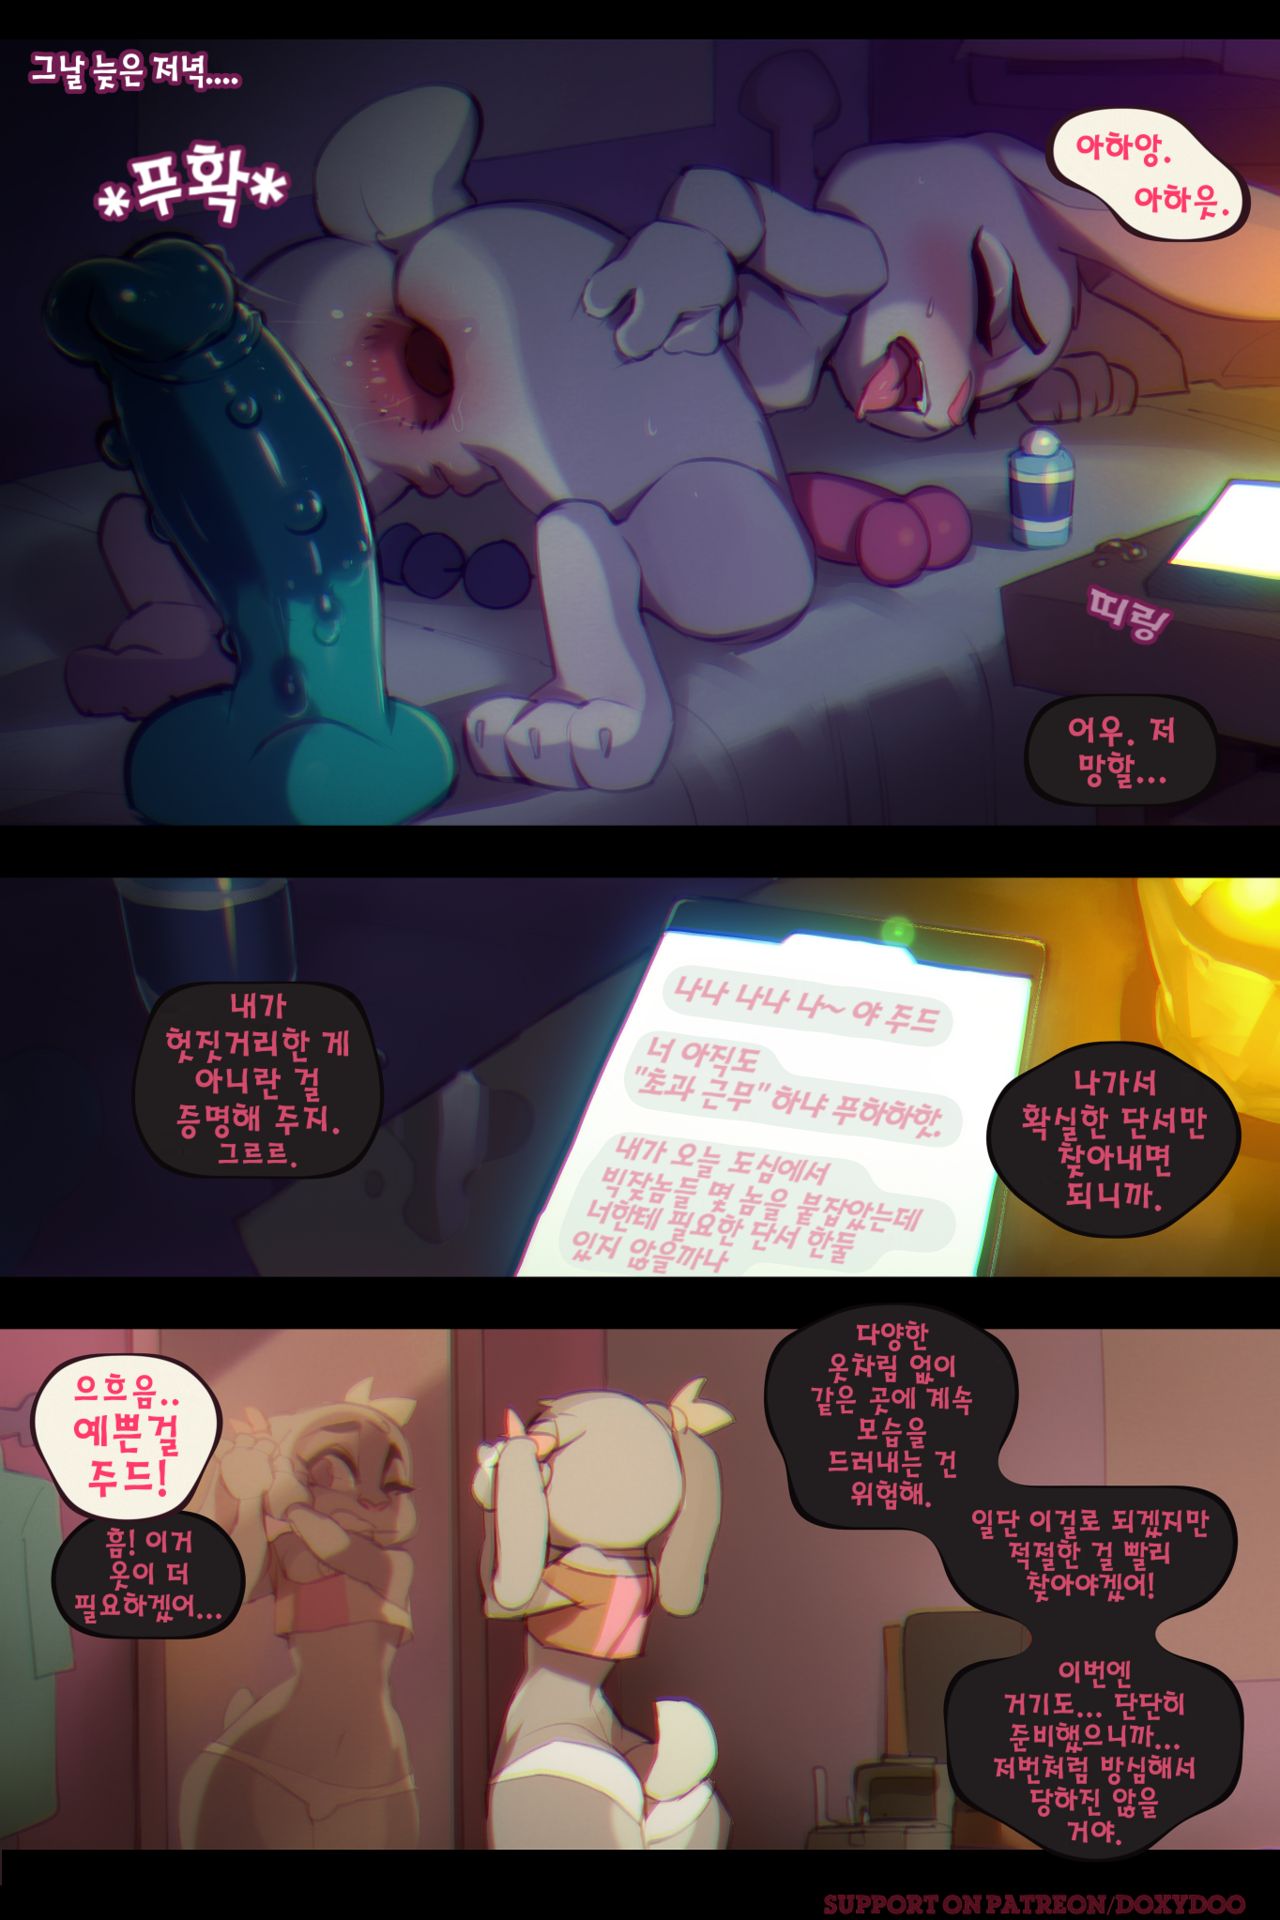 [Doxy] Sweet Sting Part 2: Down The Rabbit Hole | 달콤한 함정수사 2부: 토끼 굴속으로 (Zootopia) [Korean] [Ongoing] 